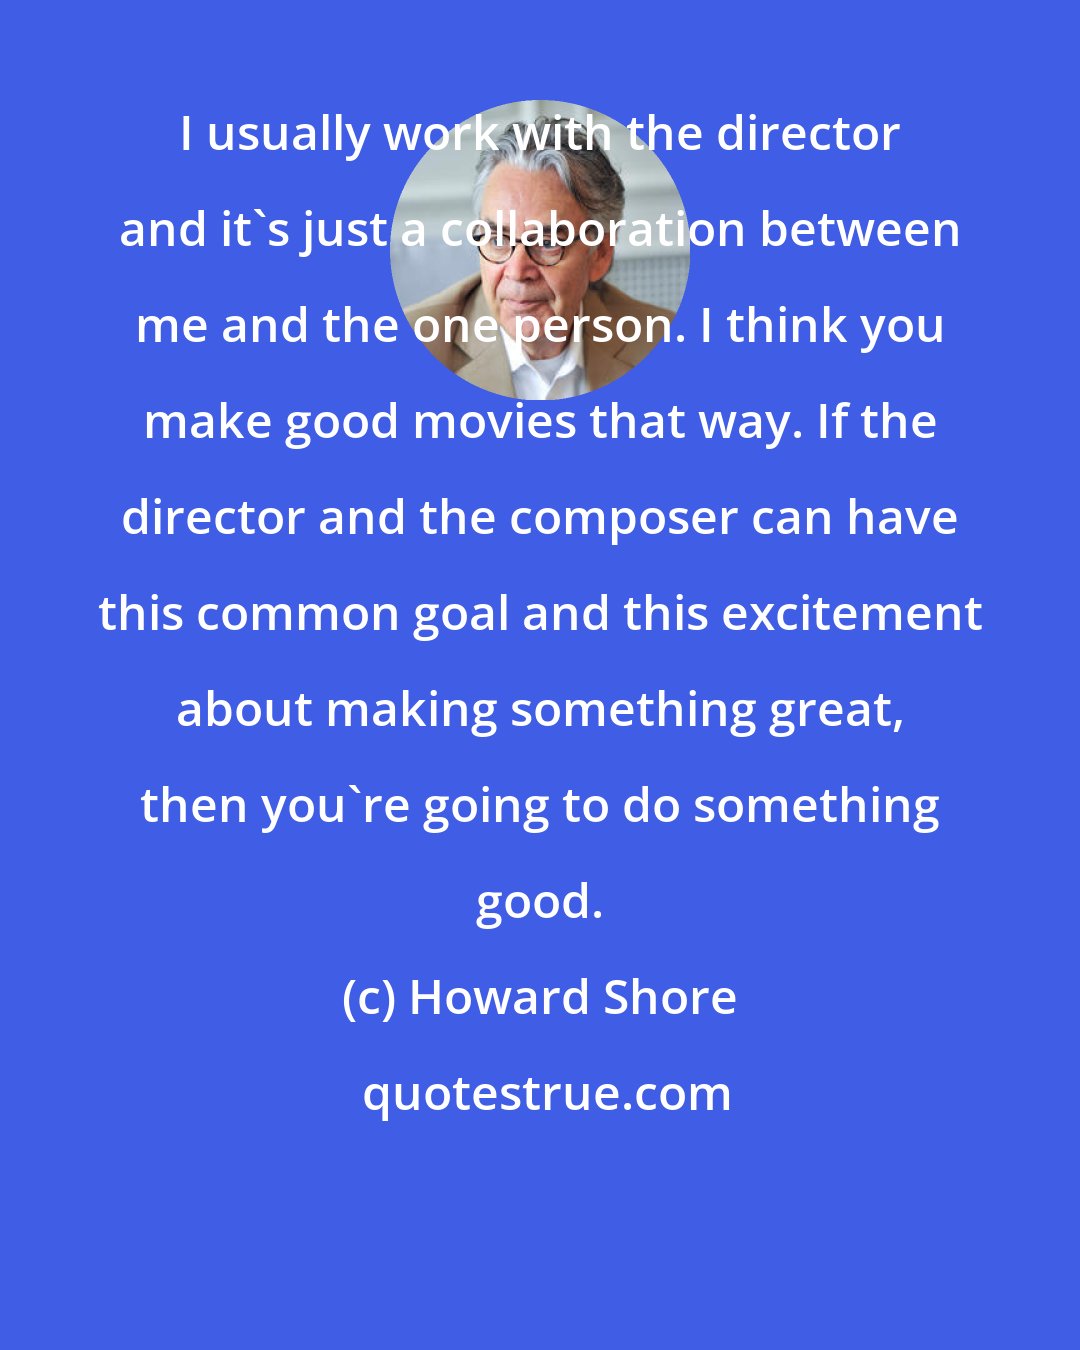 Howard Shore: I usually work with the director and it's just a collaboration between me and the one person. I think you make good movies that way. If the director and the composer can have this common goal and this excitement about making something great, then you're going to do something good.